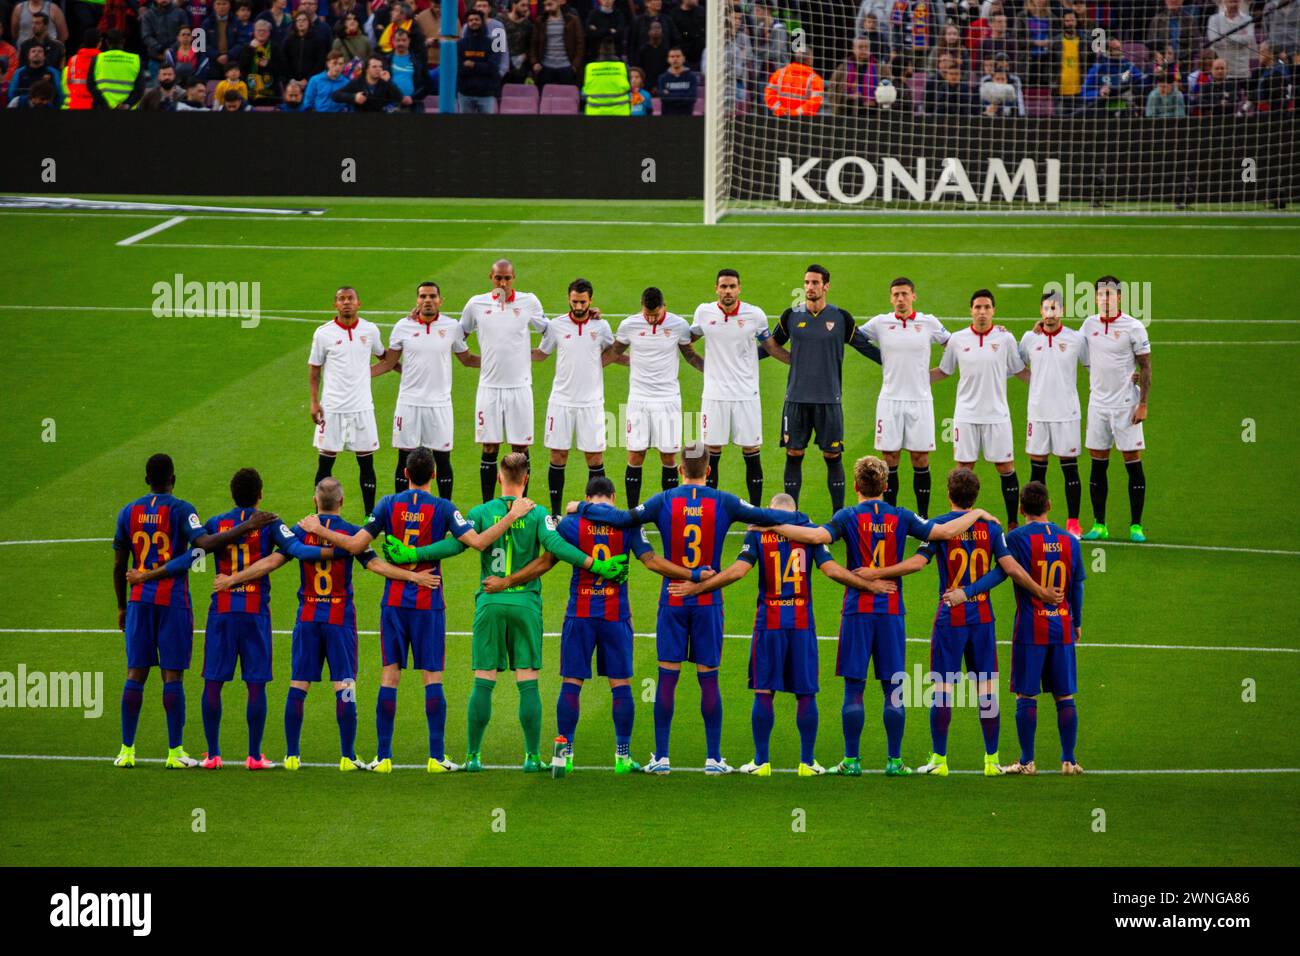 TEAMS LINE UP, BARCELONA FC, 2017: The two teams line up for a minute's silence before the match. Barcelona FC v Sevilla FC at Camp Nou, Barcelona on 5 April 2017. Photo: Rob Watkins. Barca won the game 3-0 with three goals in the first 33 minutes. The game was played in a deluge of rain during a massive spring storm. Stock Photo